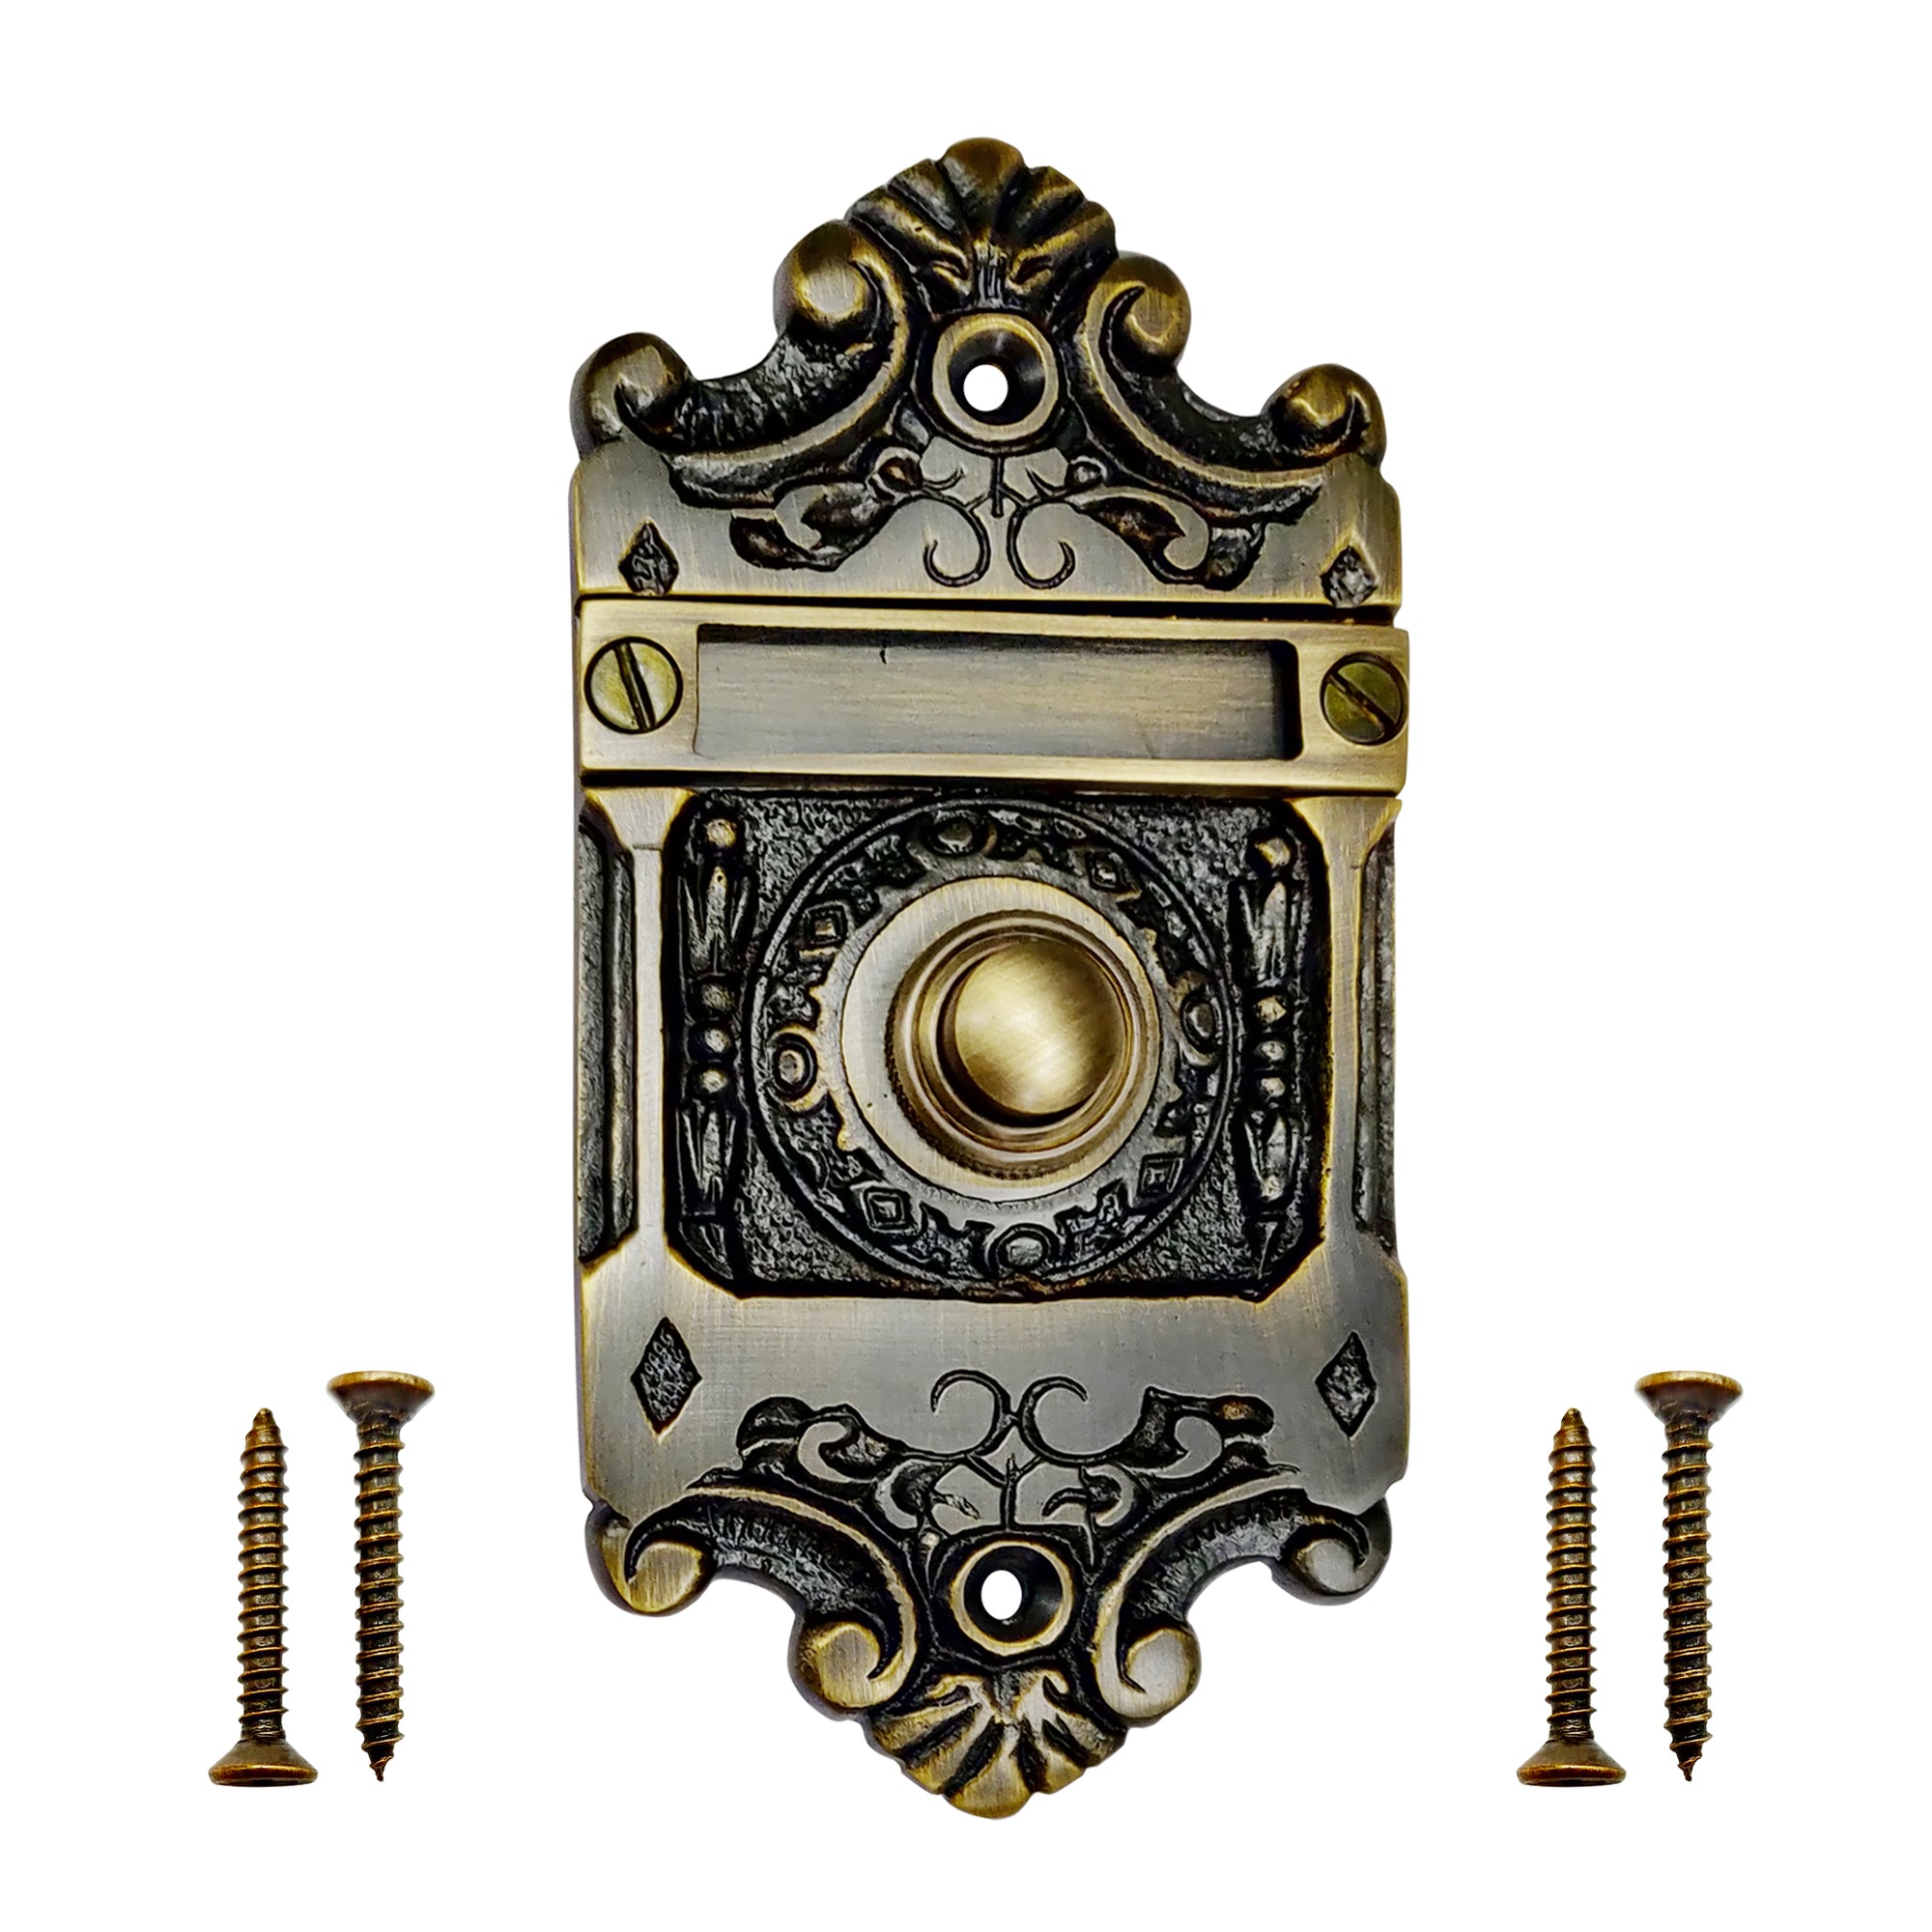 Wired Iron Circular Doorbell Chime Push Button in Antique Brass Finish  Vintage Decorative Door Bell with Easy Installation